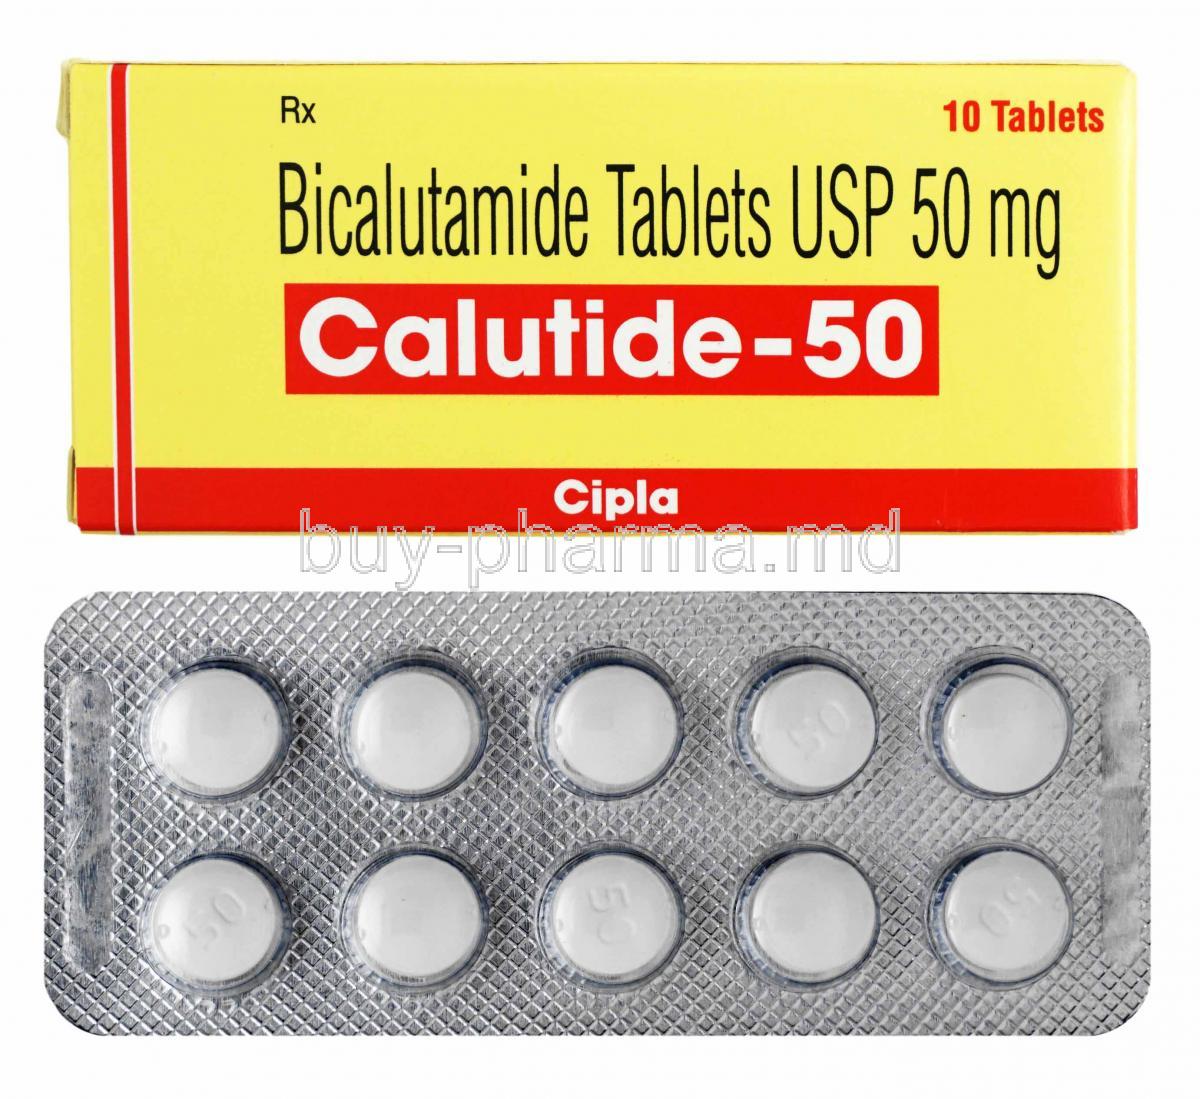 Calutide, Bicalutamide 50mg box and tablets